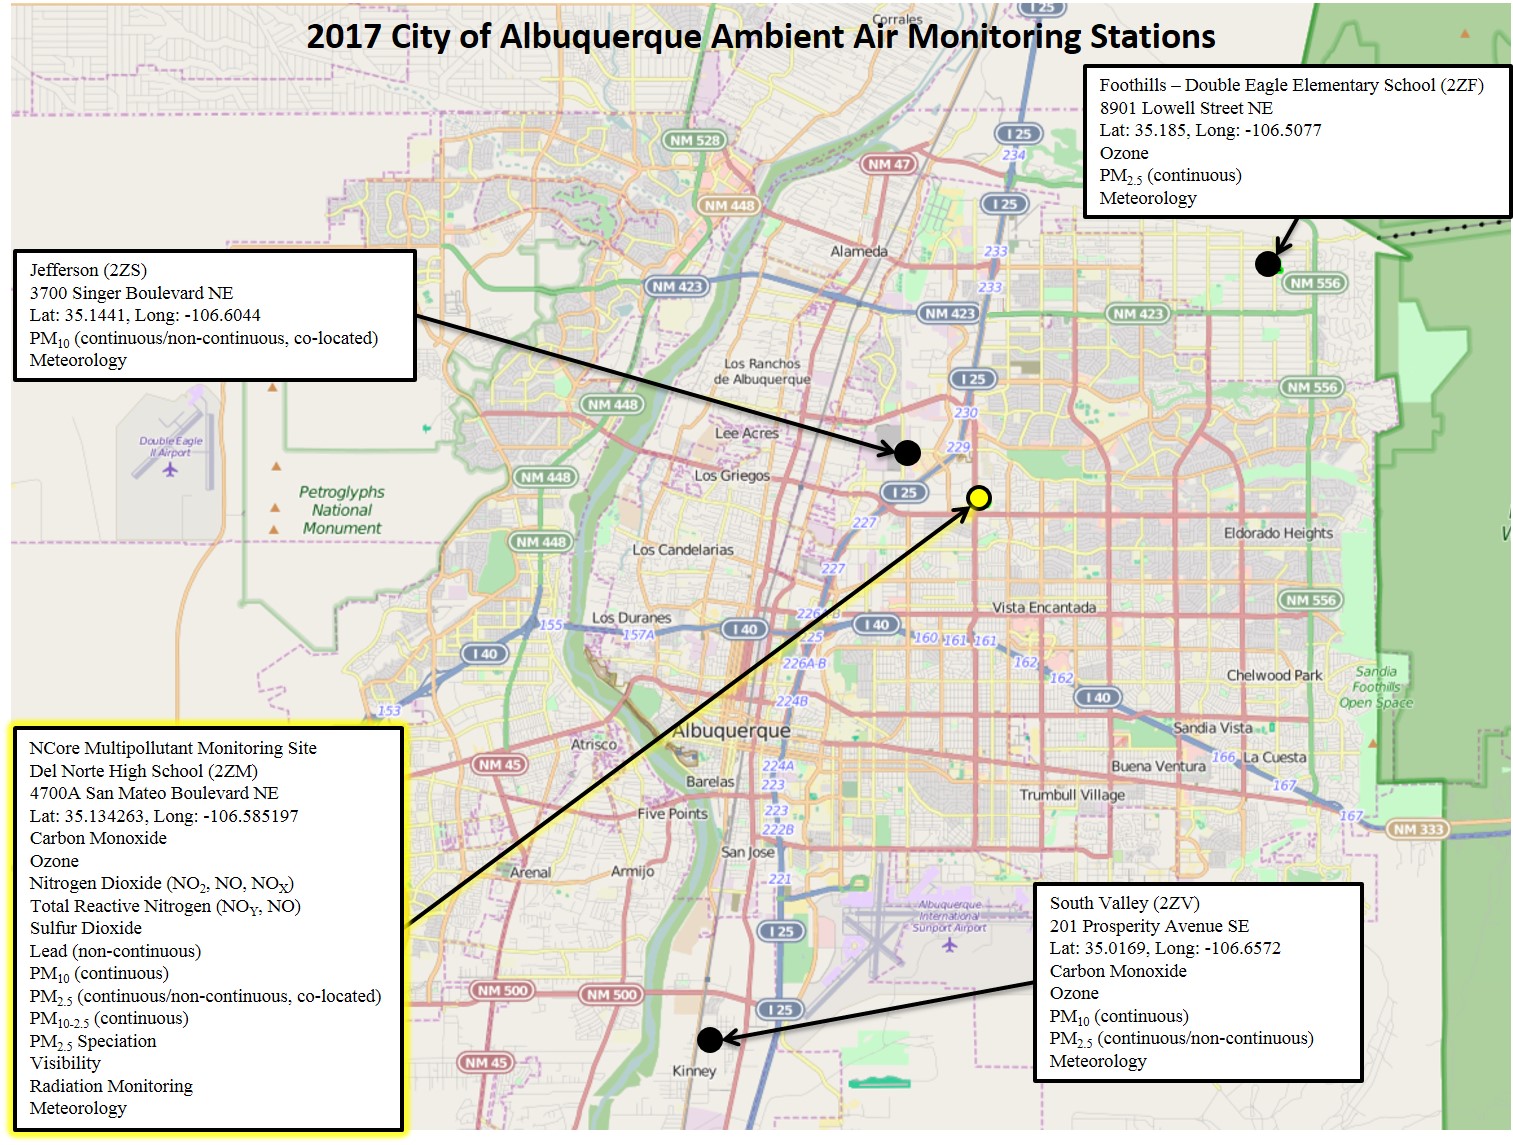 City of Albuquerque Ambient Air Monitoring Stations